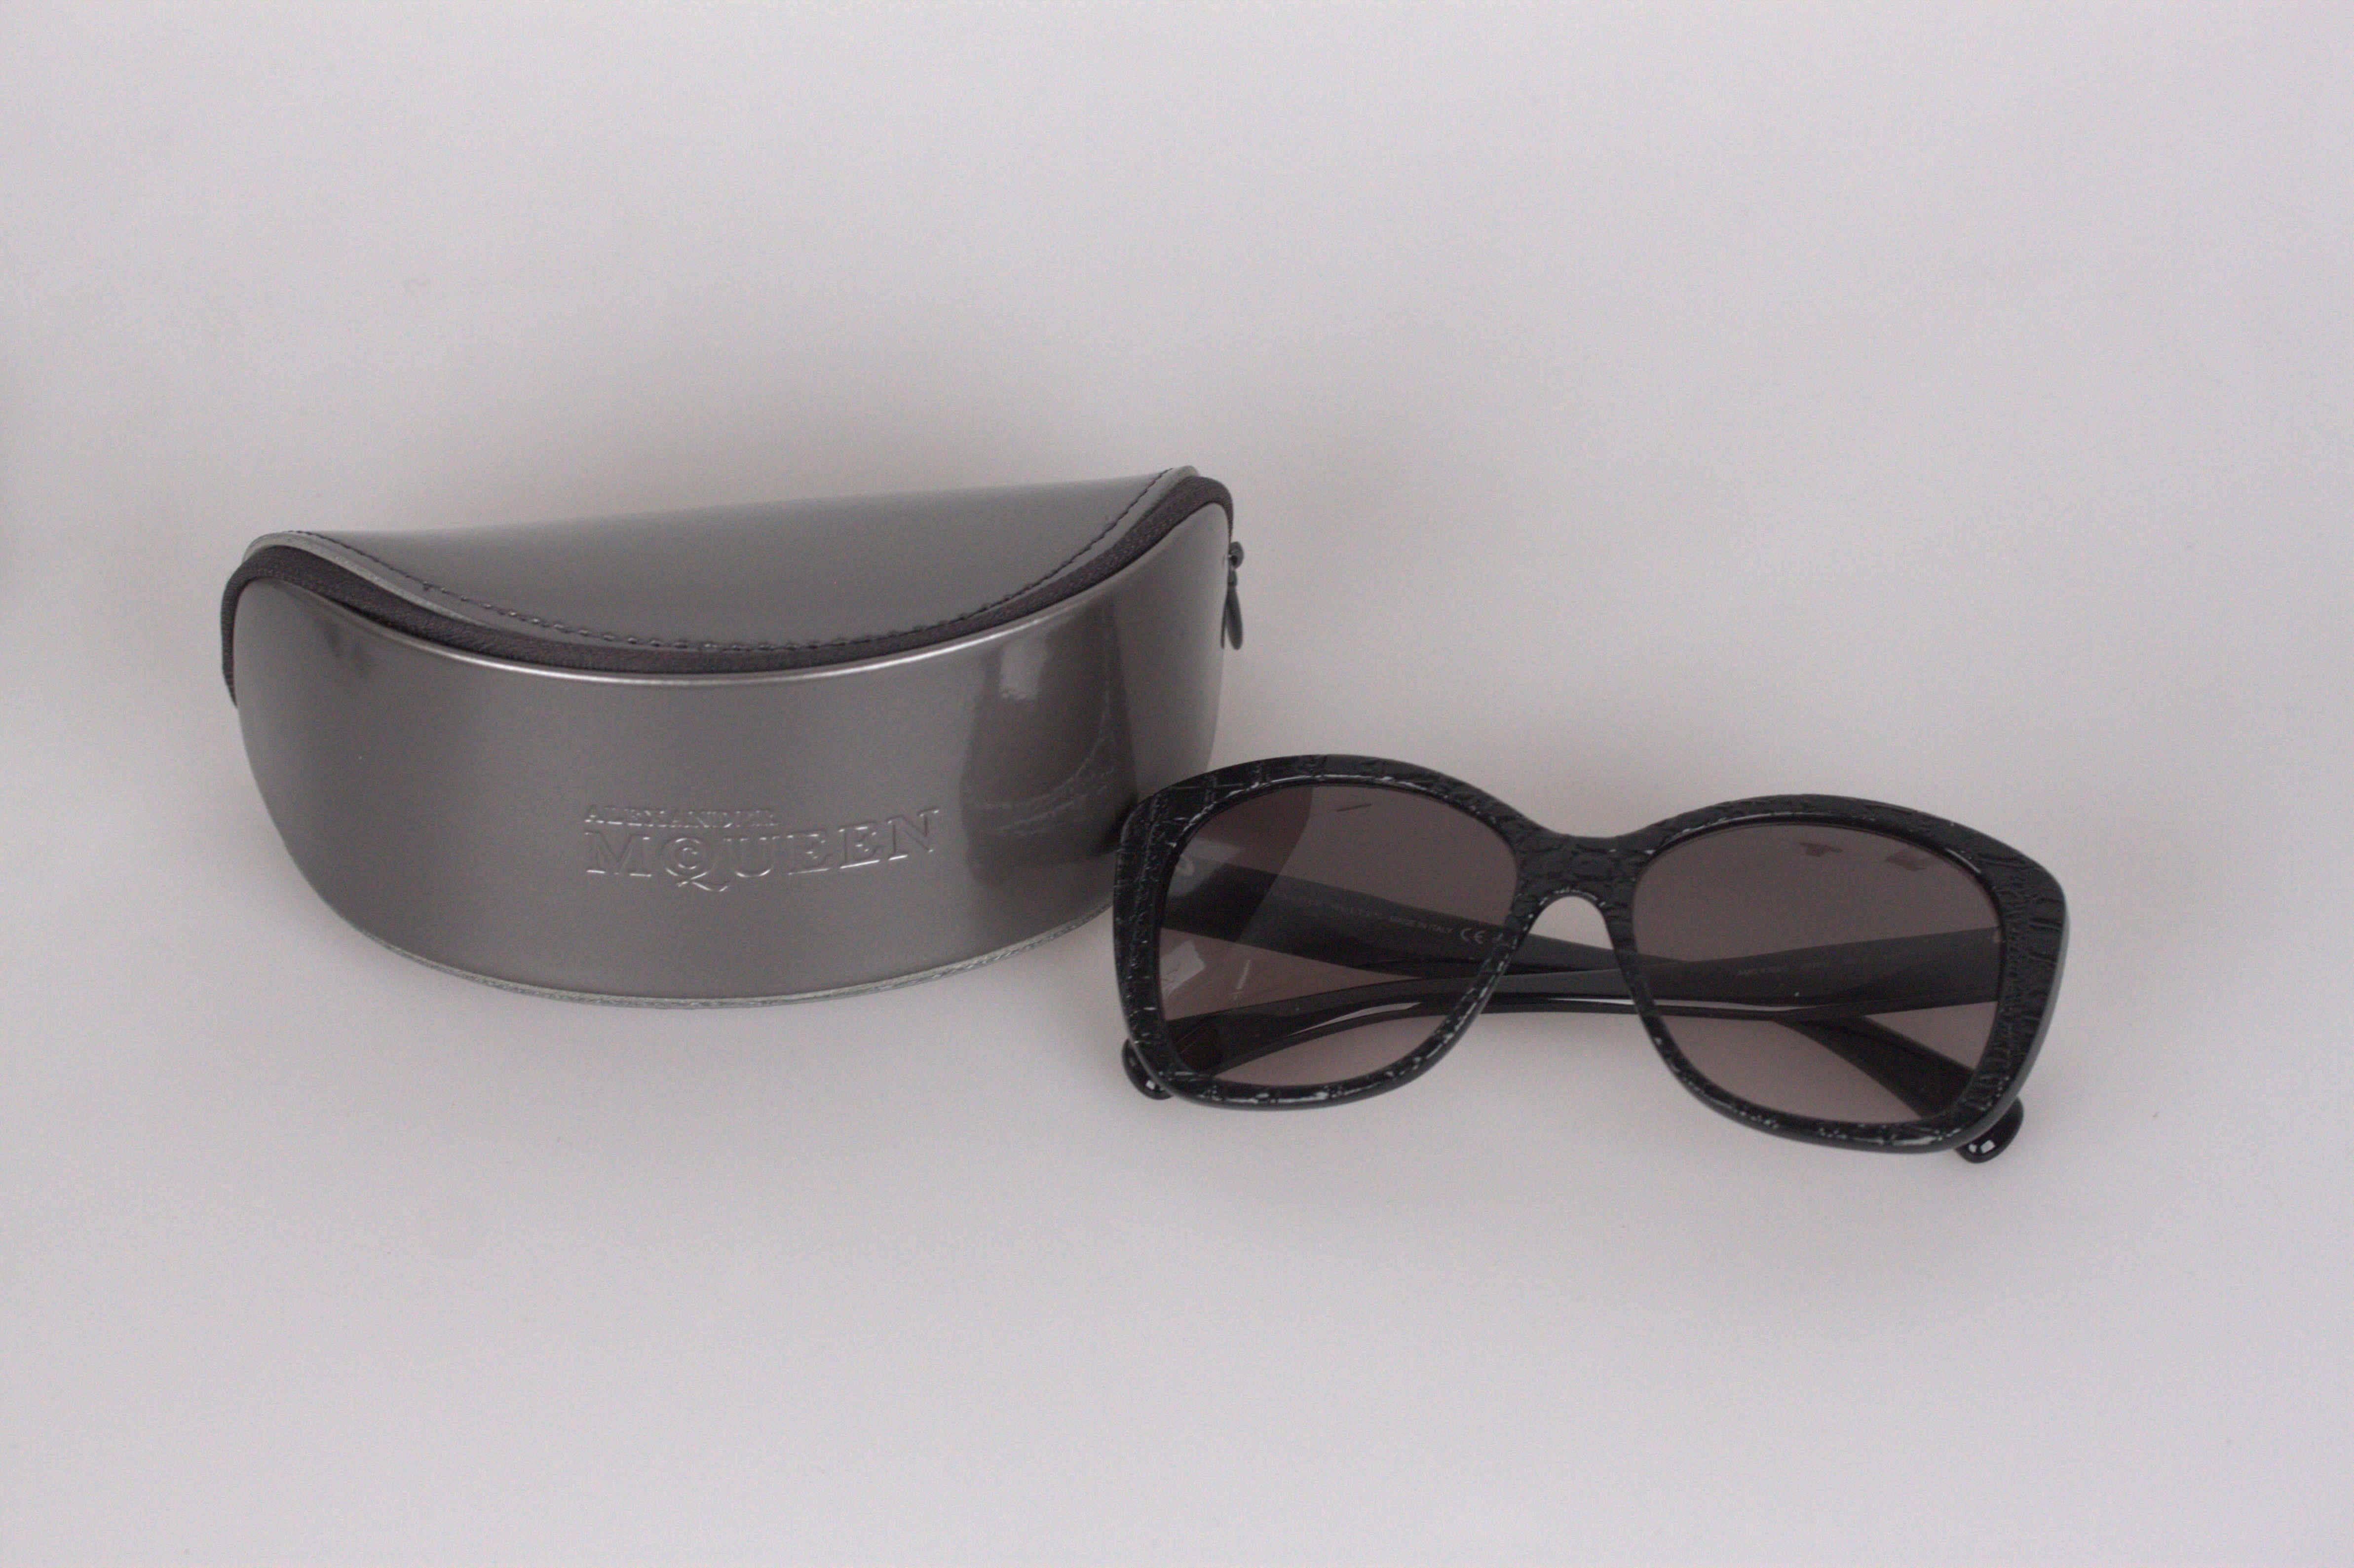 NEW; MINT & BOXED!

Alexander McQueen, Made in Italy

Model refs: AMQ 4193/S - 56/16 - 140 - 807EU

Crocodile look effect (animal print) on the front

Original smoke blue / gray GRADIENT 100% UV protection lenses

Condition: A+ :MINT